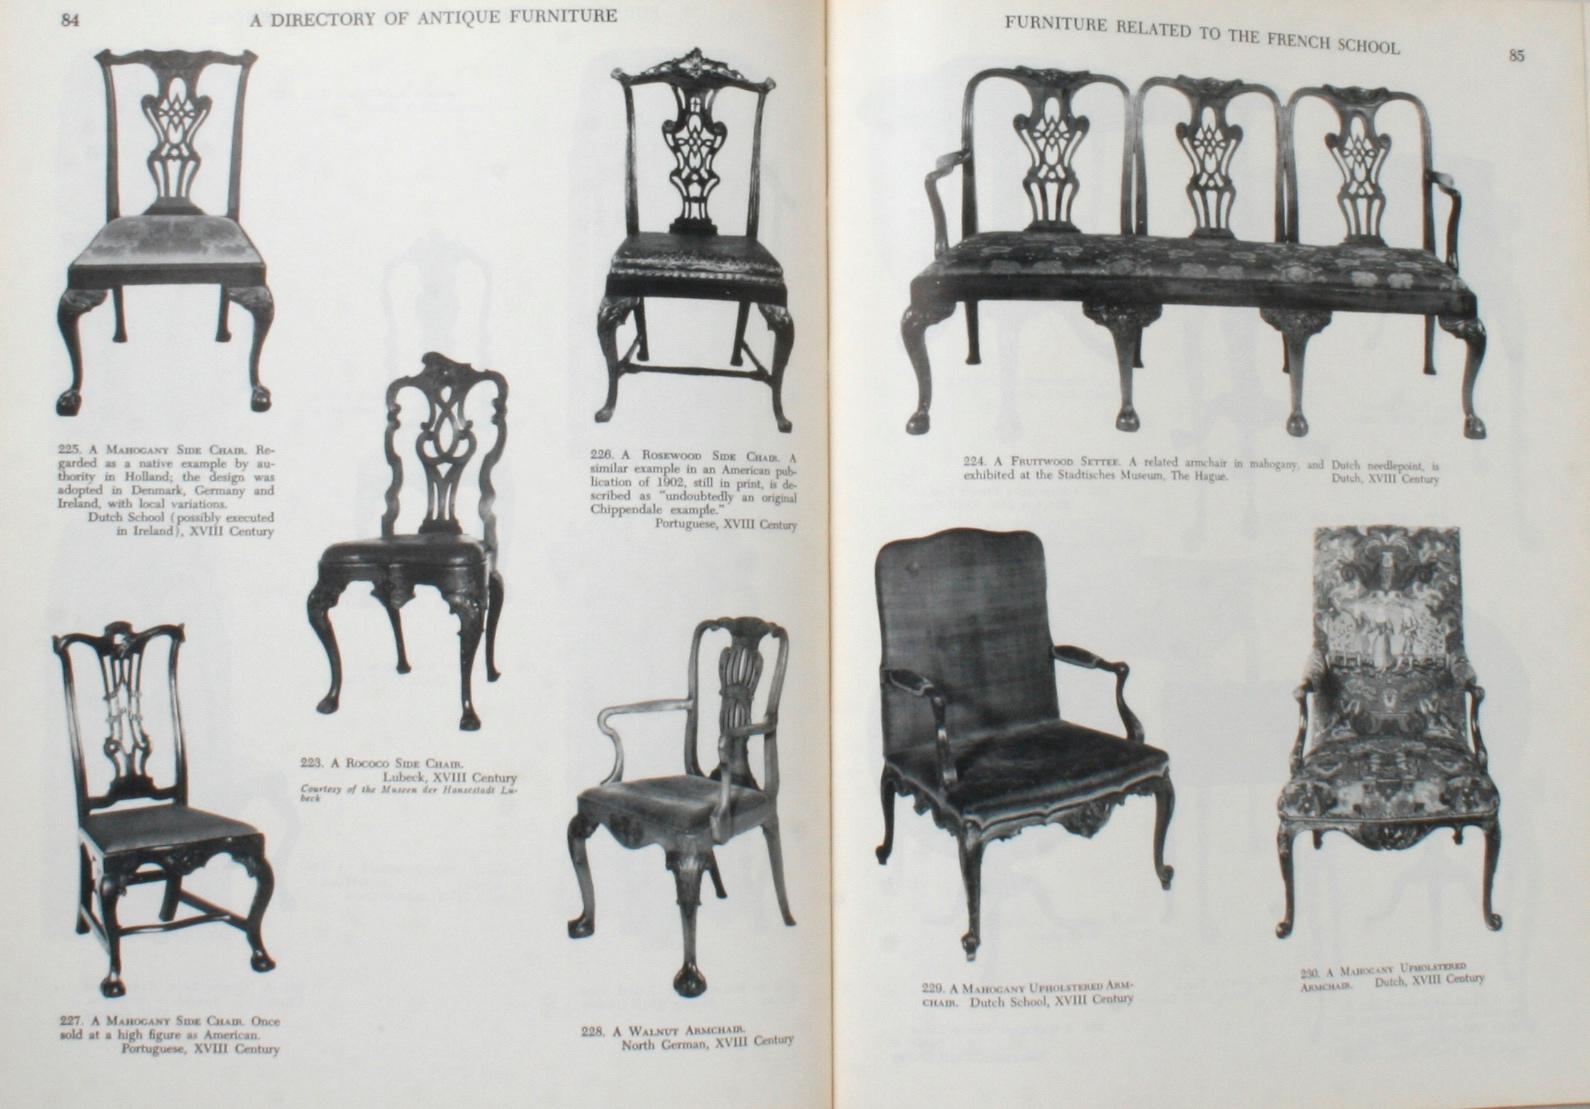 Directory of Antique Furniture by F. Lewis Hinckley 1